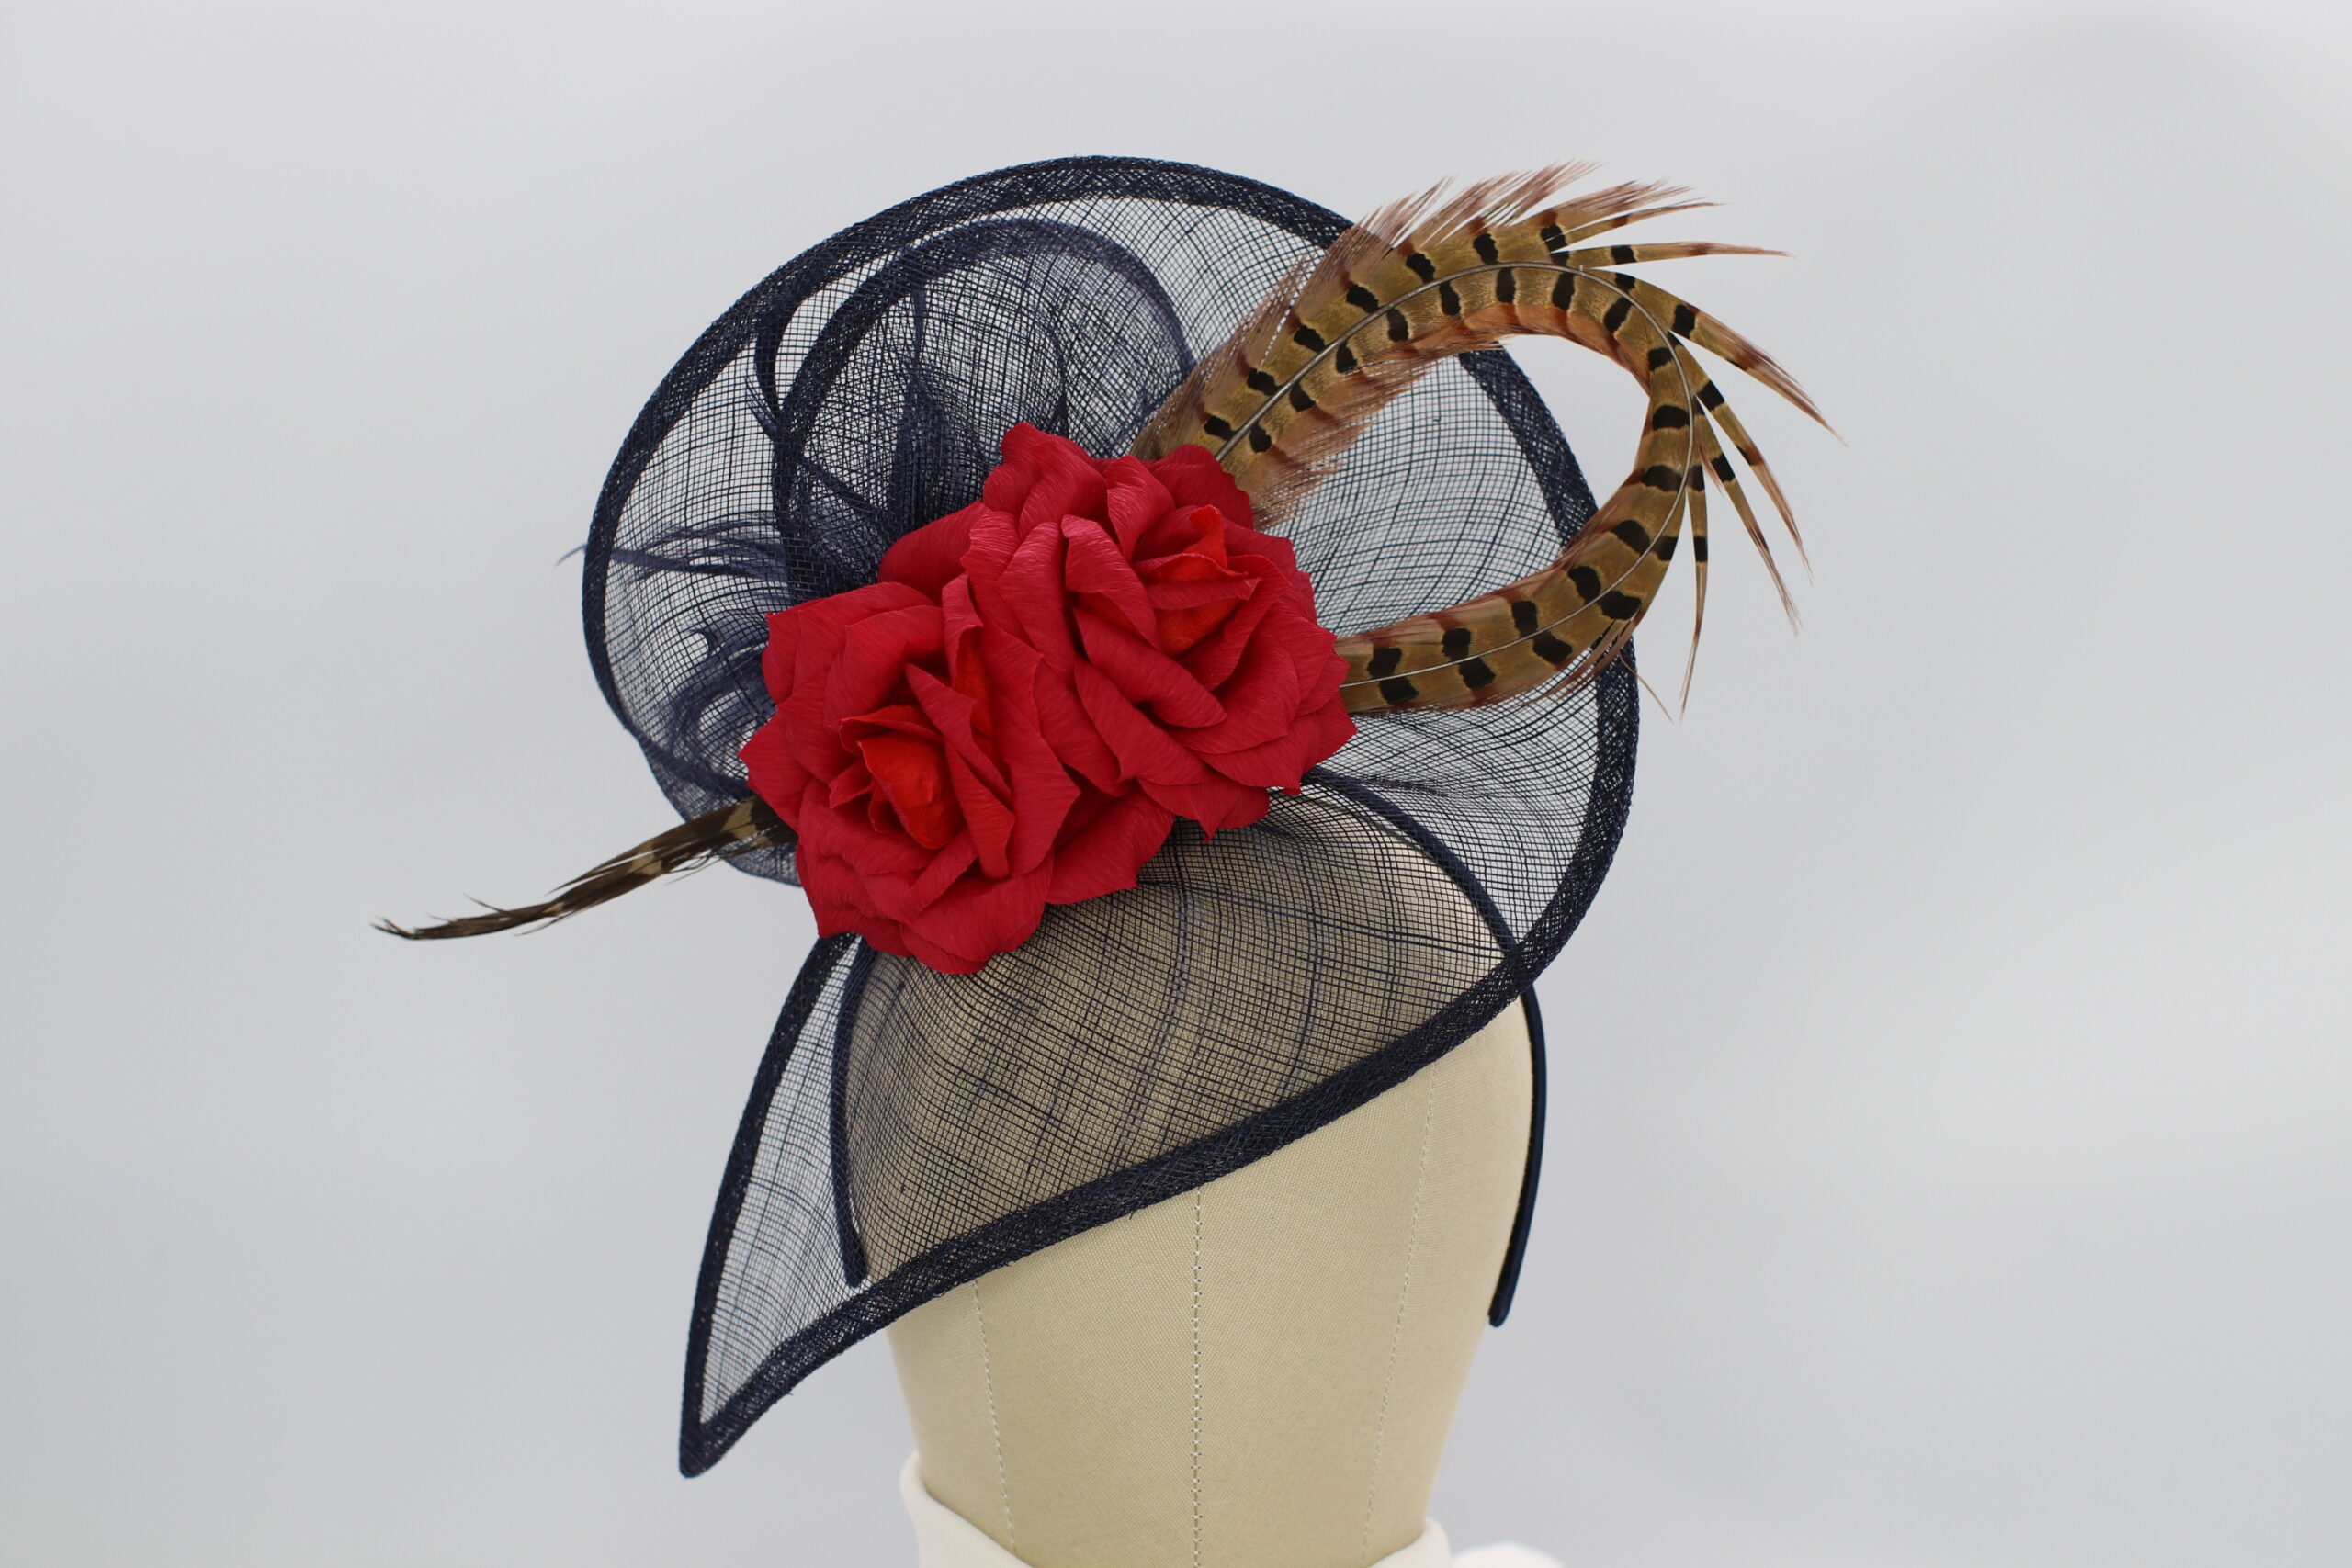 Navy blue fascinator with a pheasant feather and two hand-crafted red roses. Attached with a satin headband.